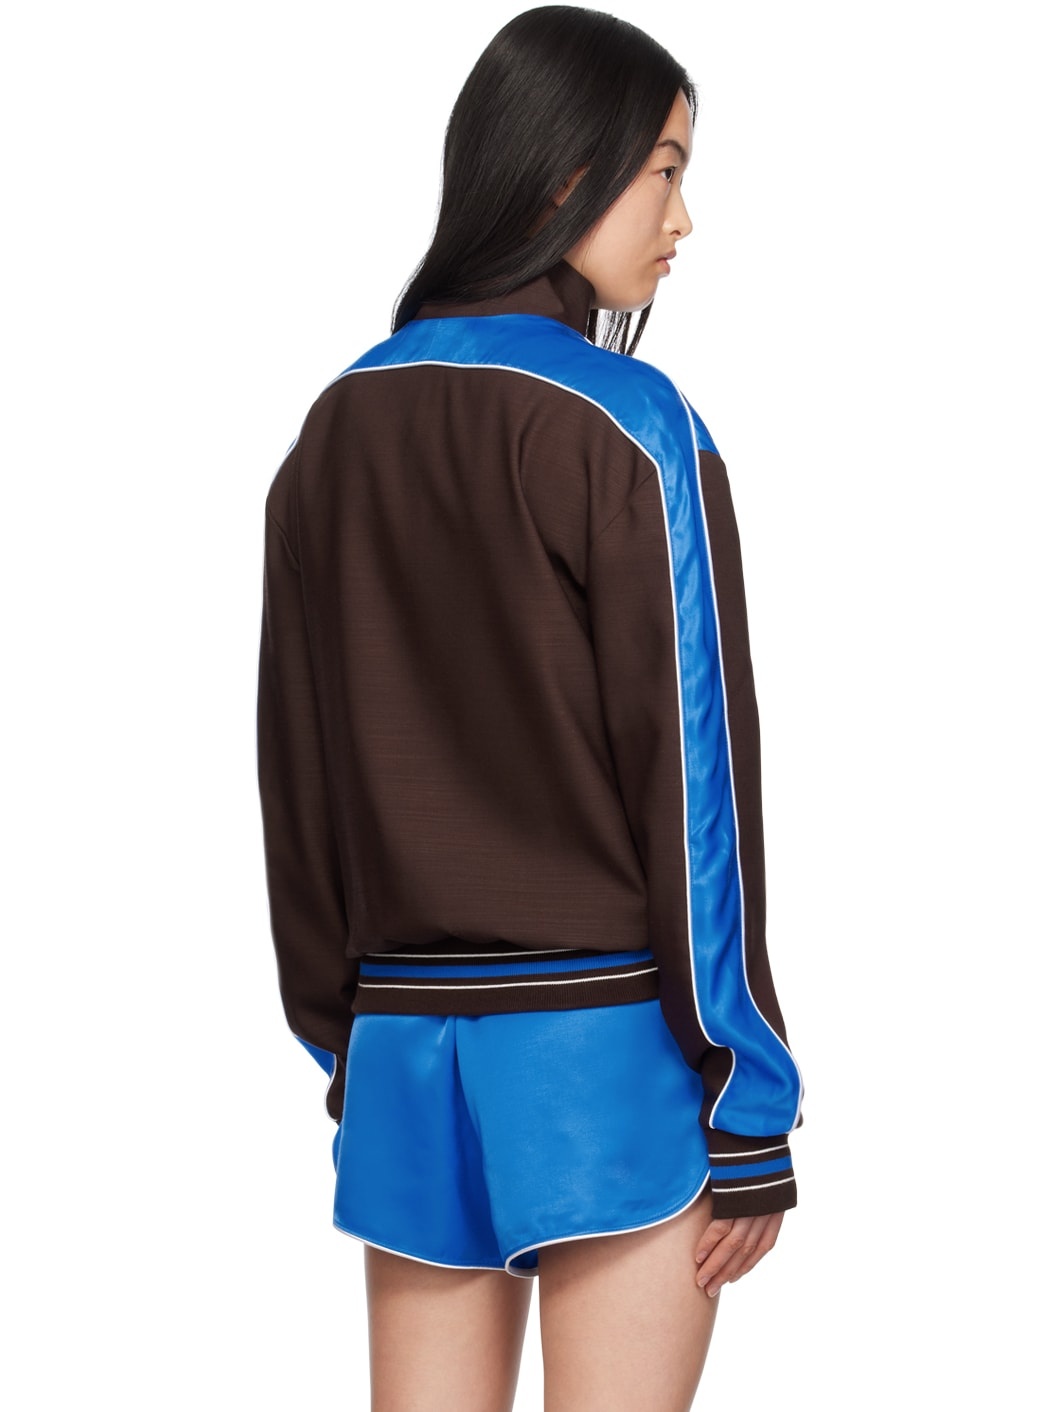 Brown & Blue Courage Track Jacket - 3